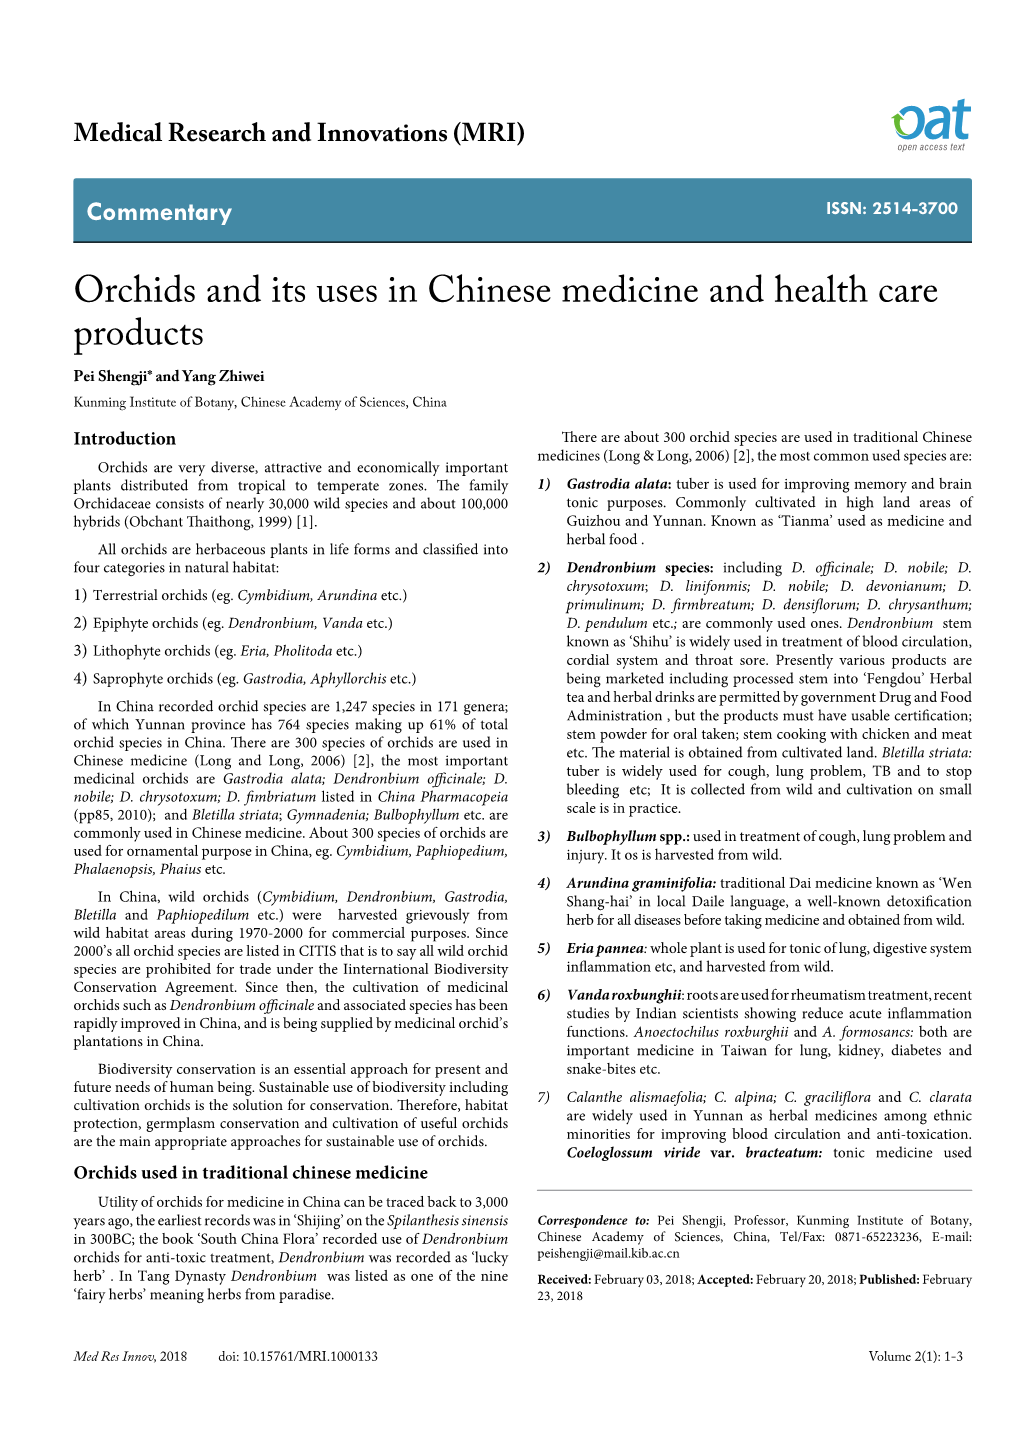 Orchids and Its Uses in Chinese Medicine and Health Care Products